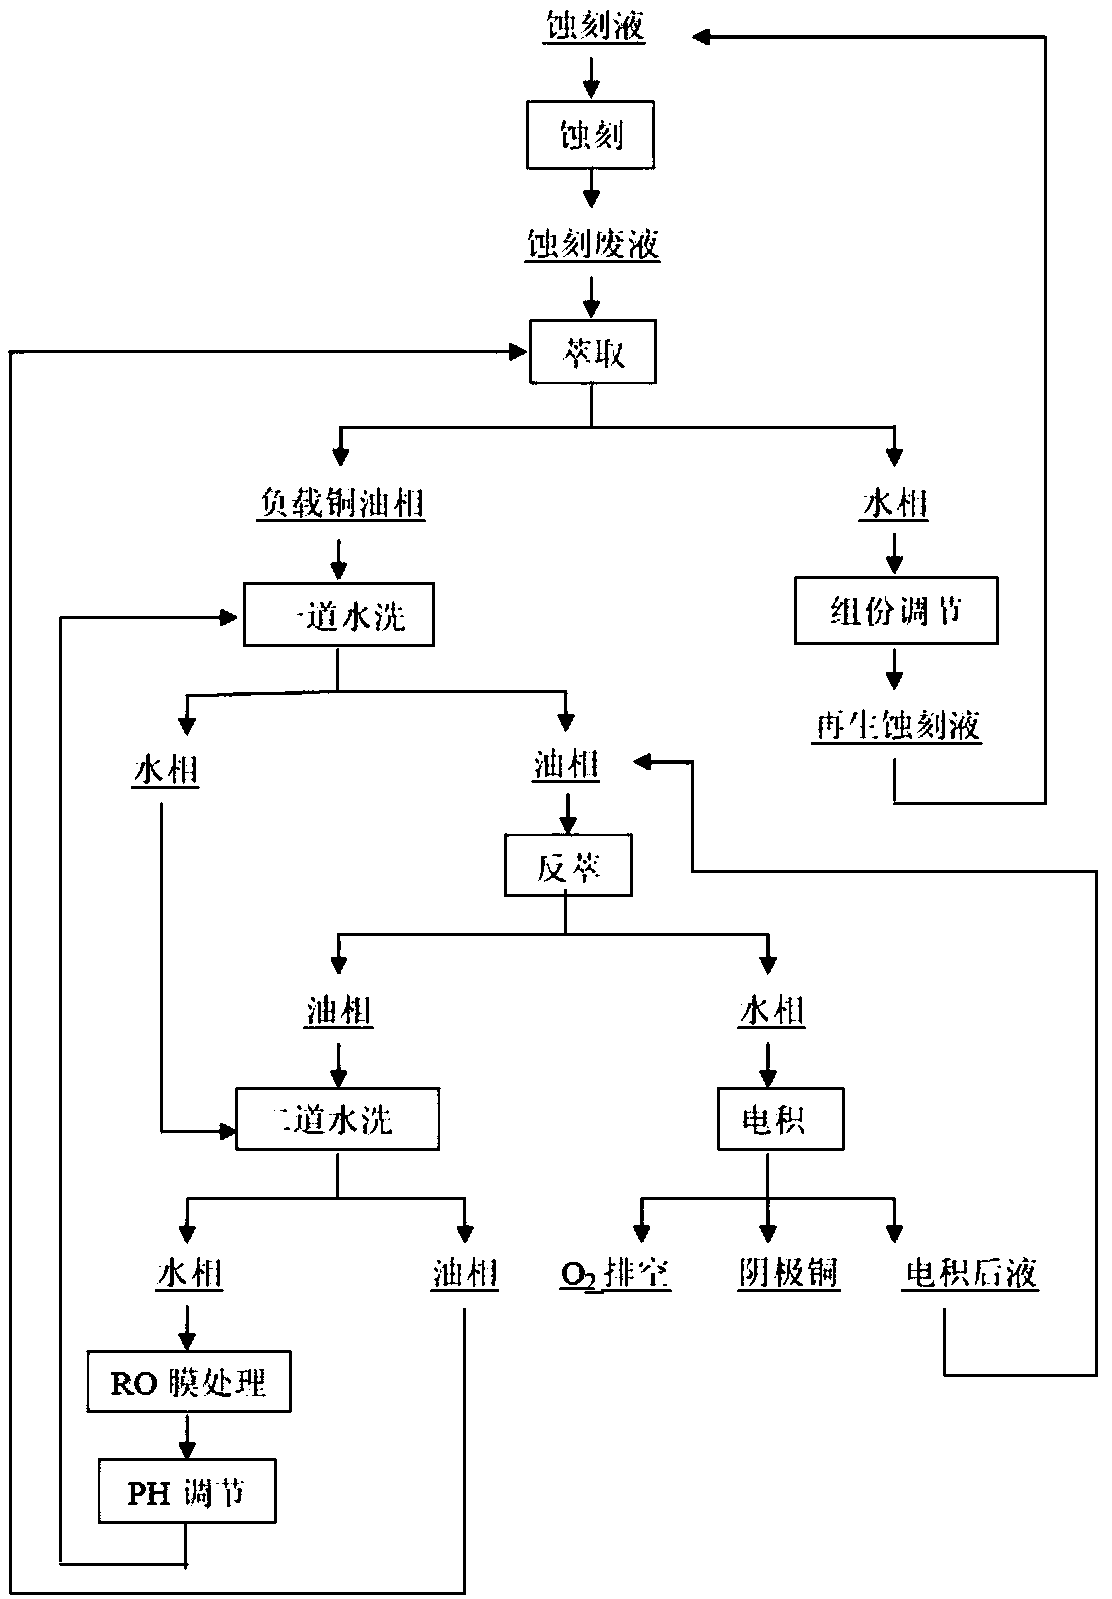 Alkaline etching solution circulation regeneration system and method thereof